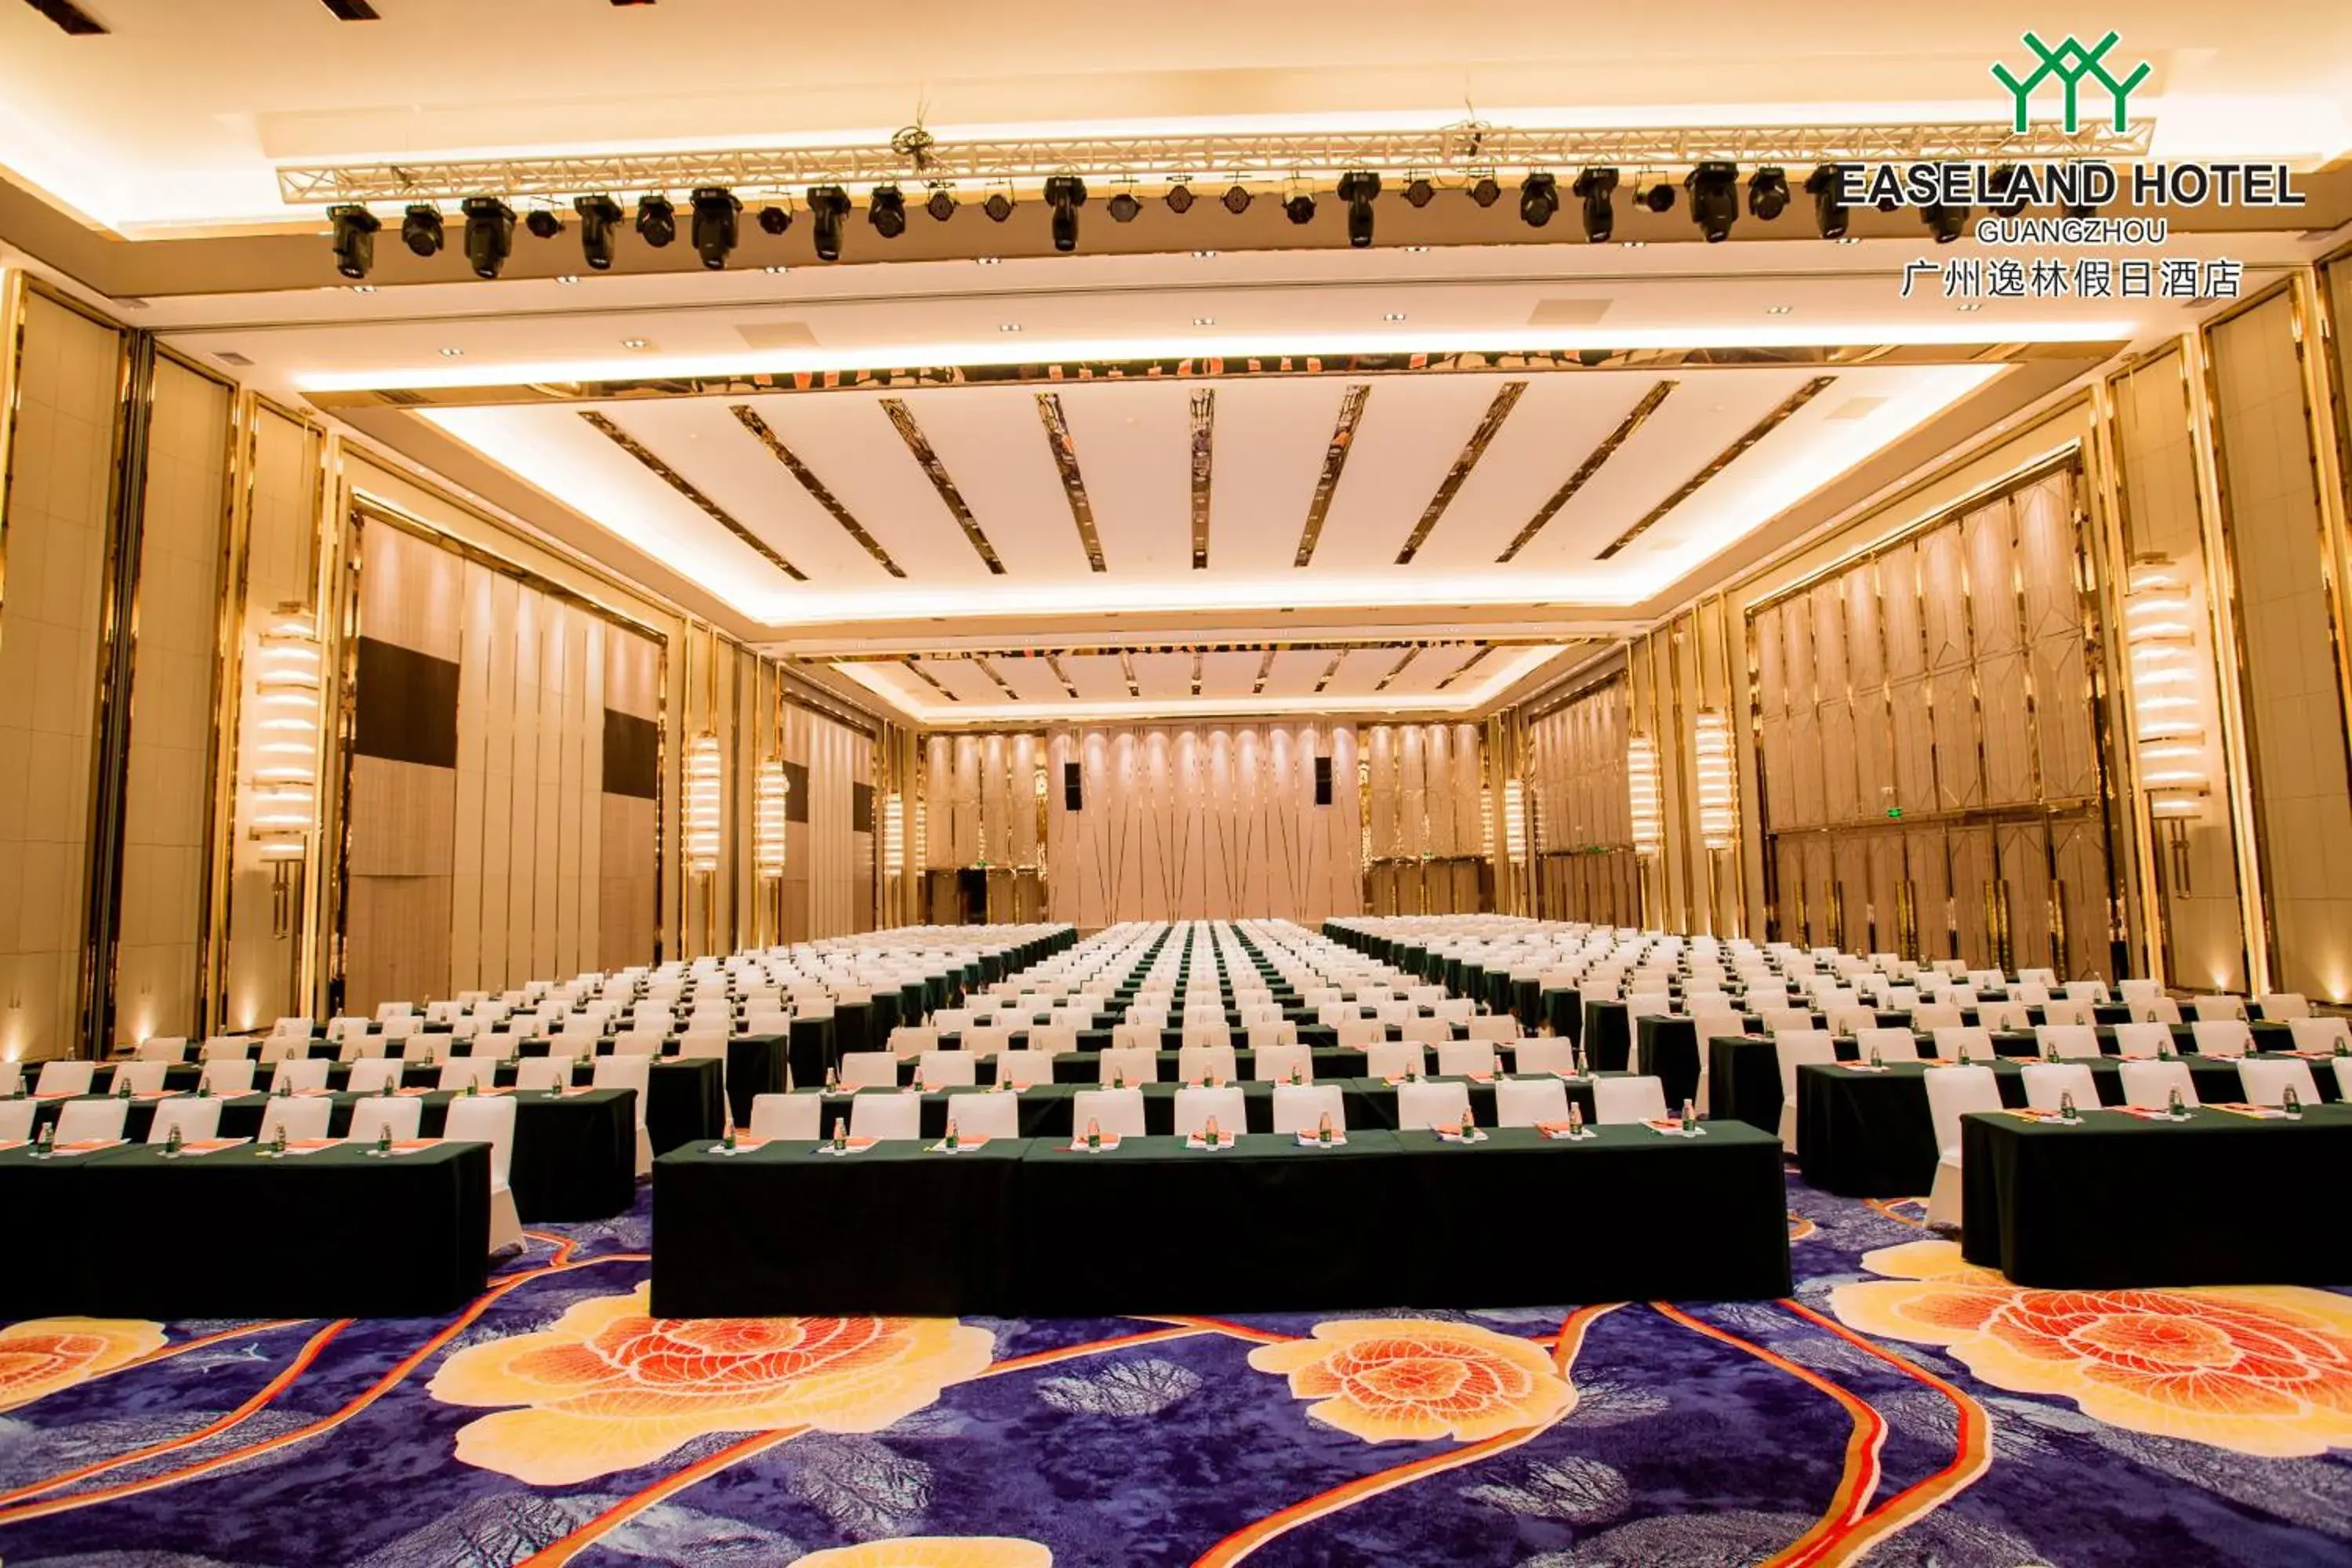 Meeting/conference room in Easeland Hotel